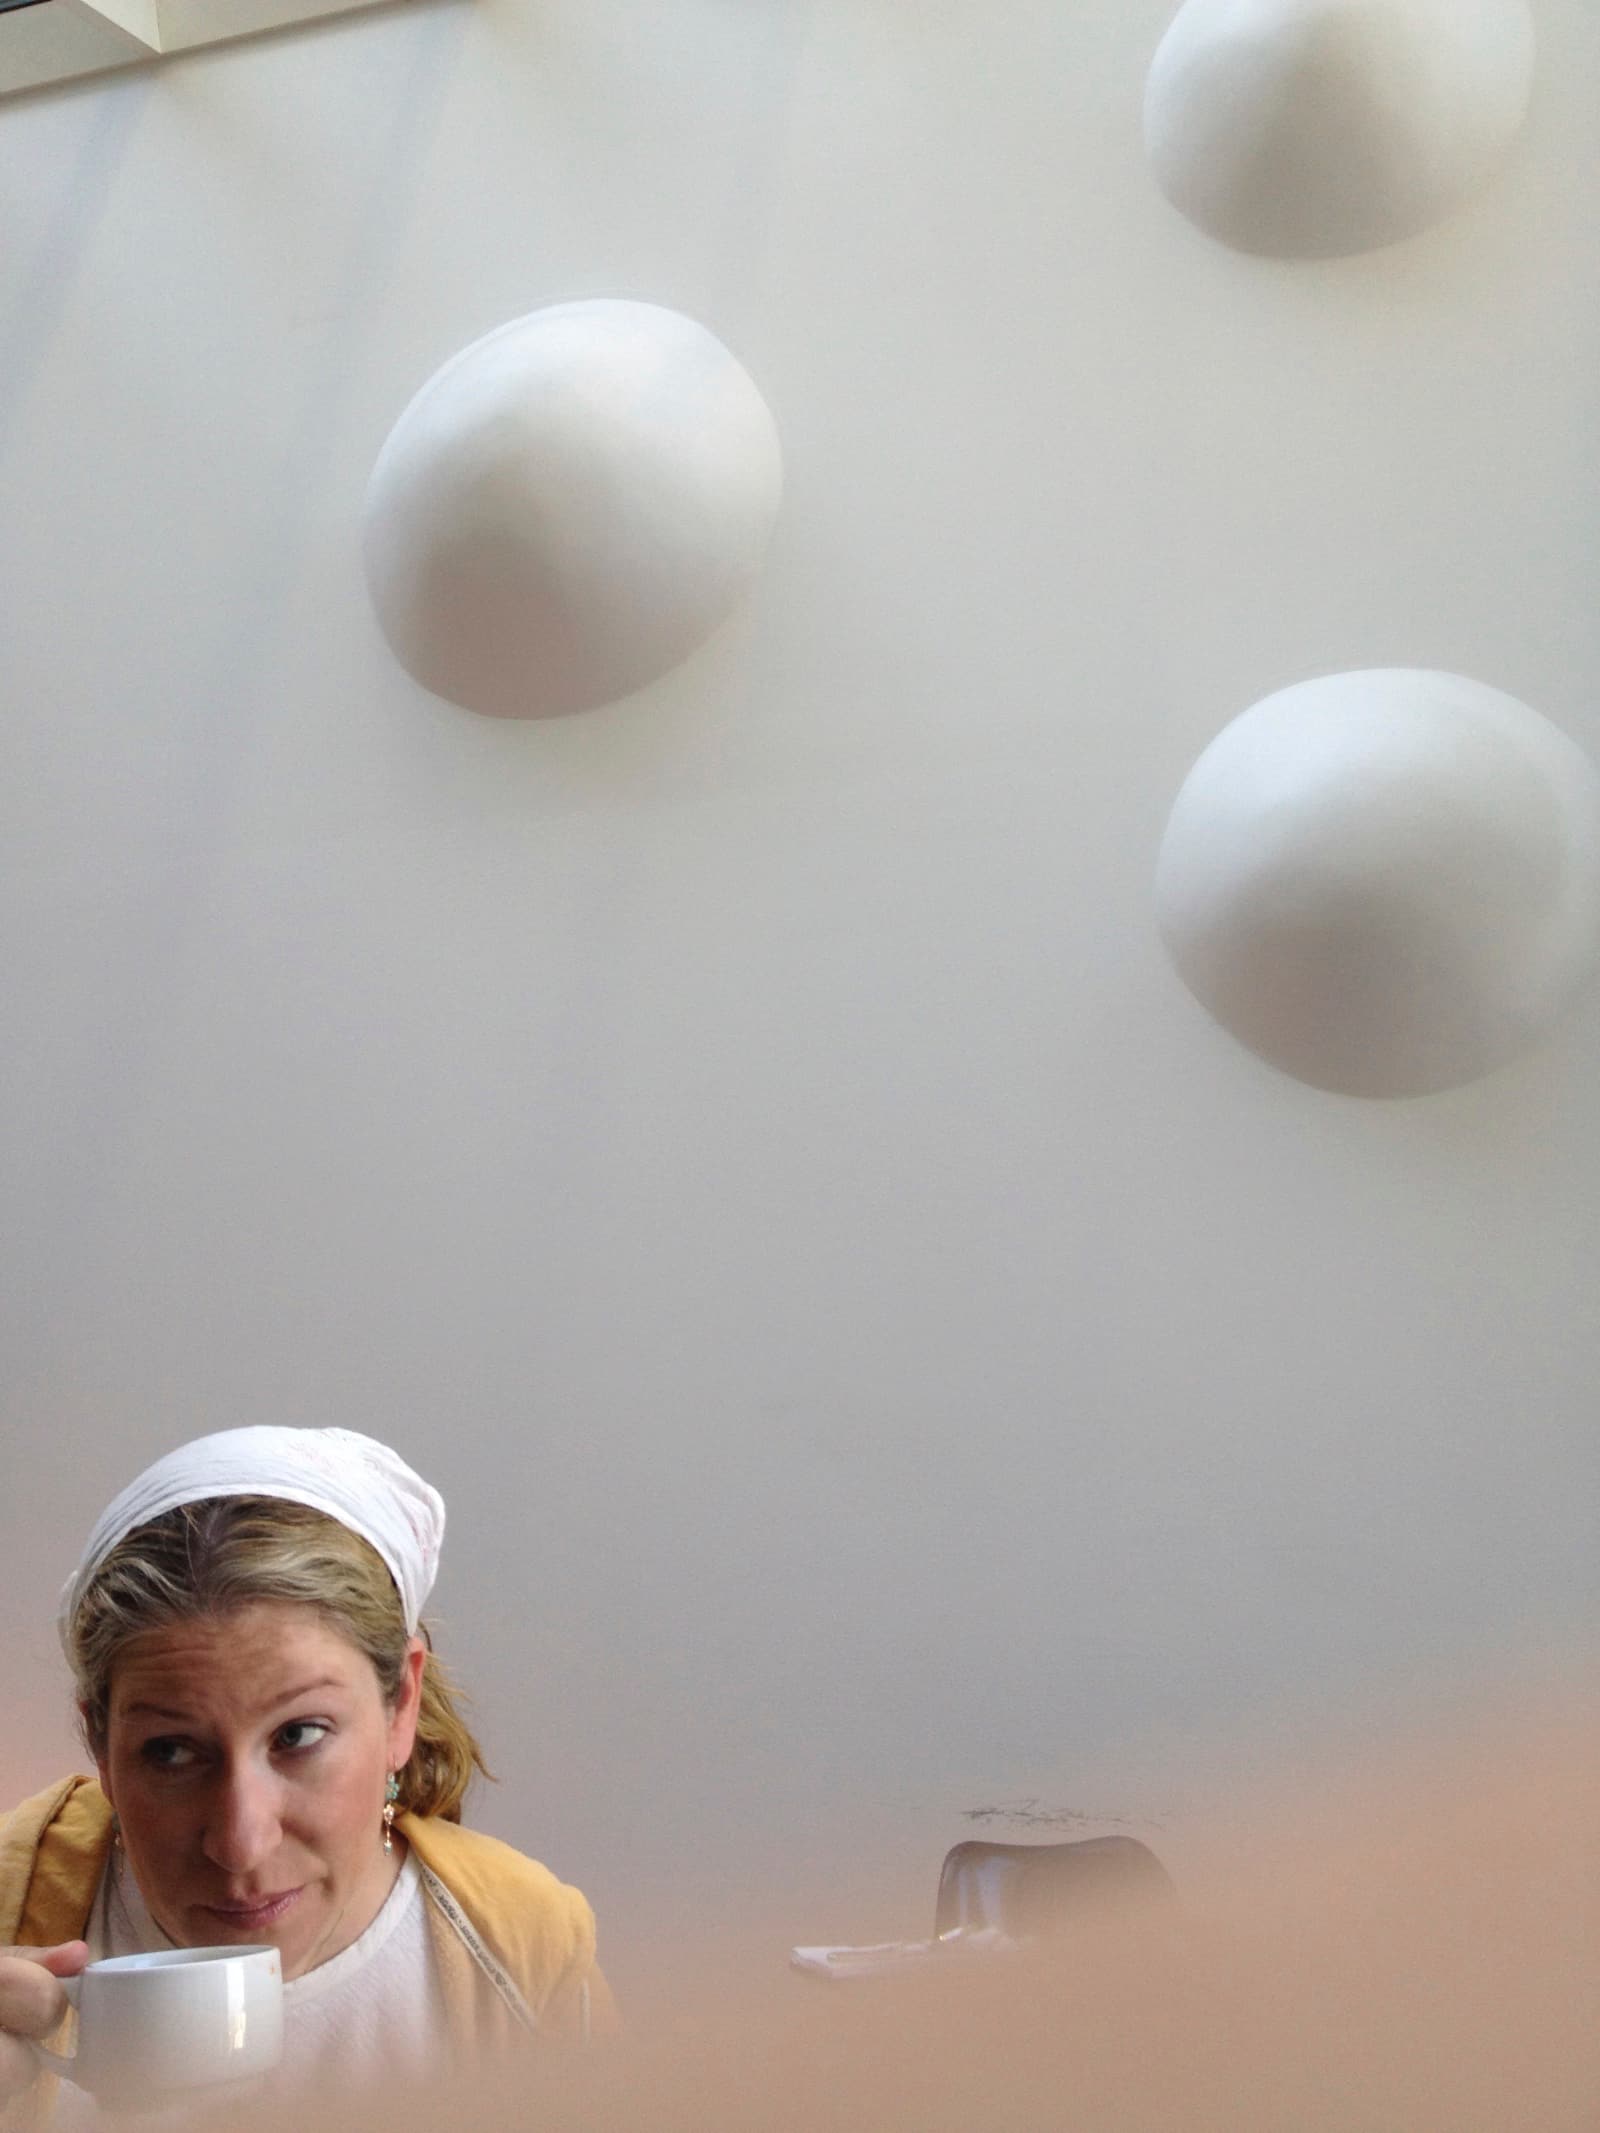 A woman drinking coffee in front of a wall covered with giant hemispherical bumps